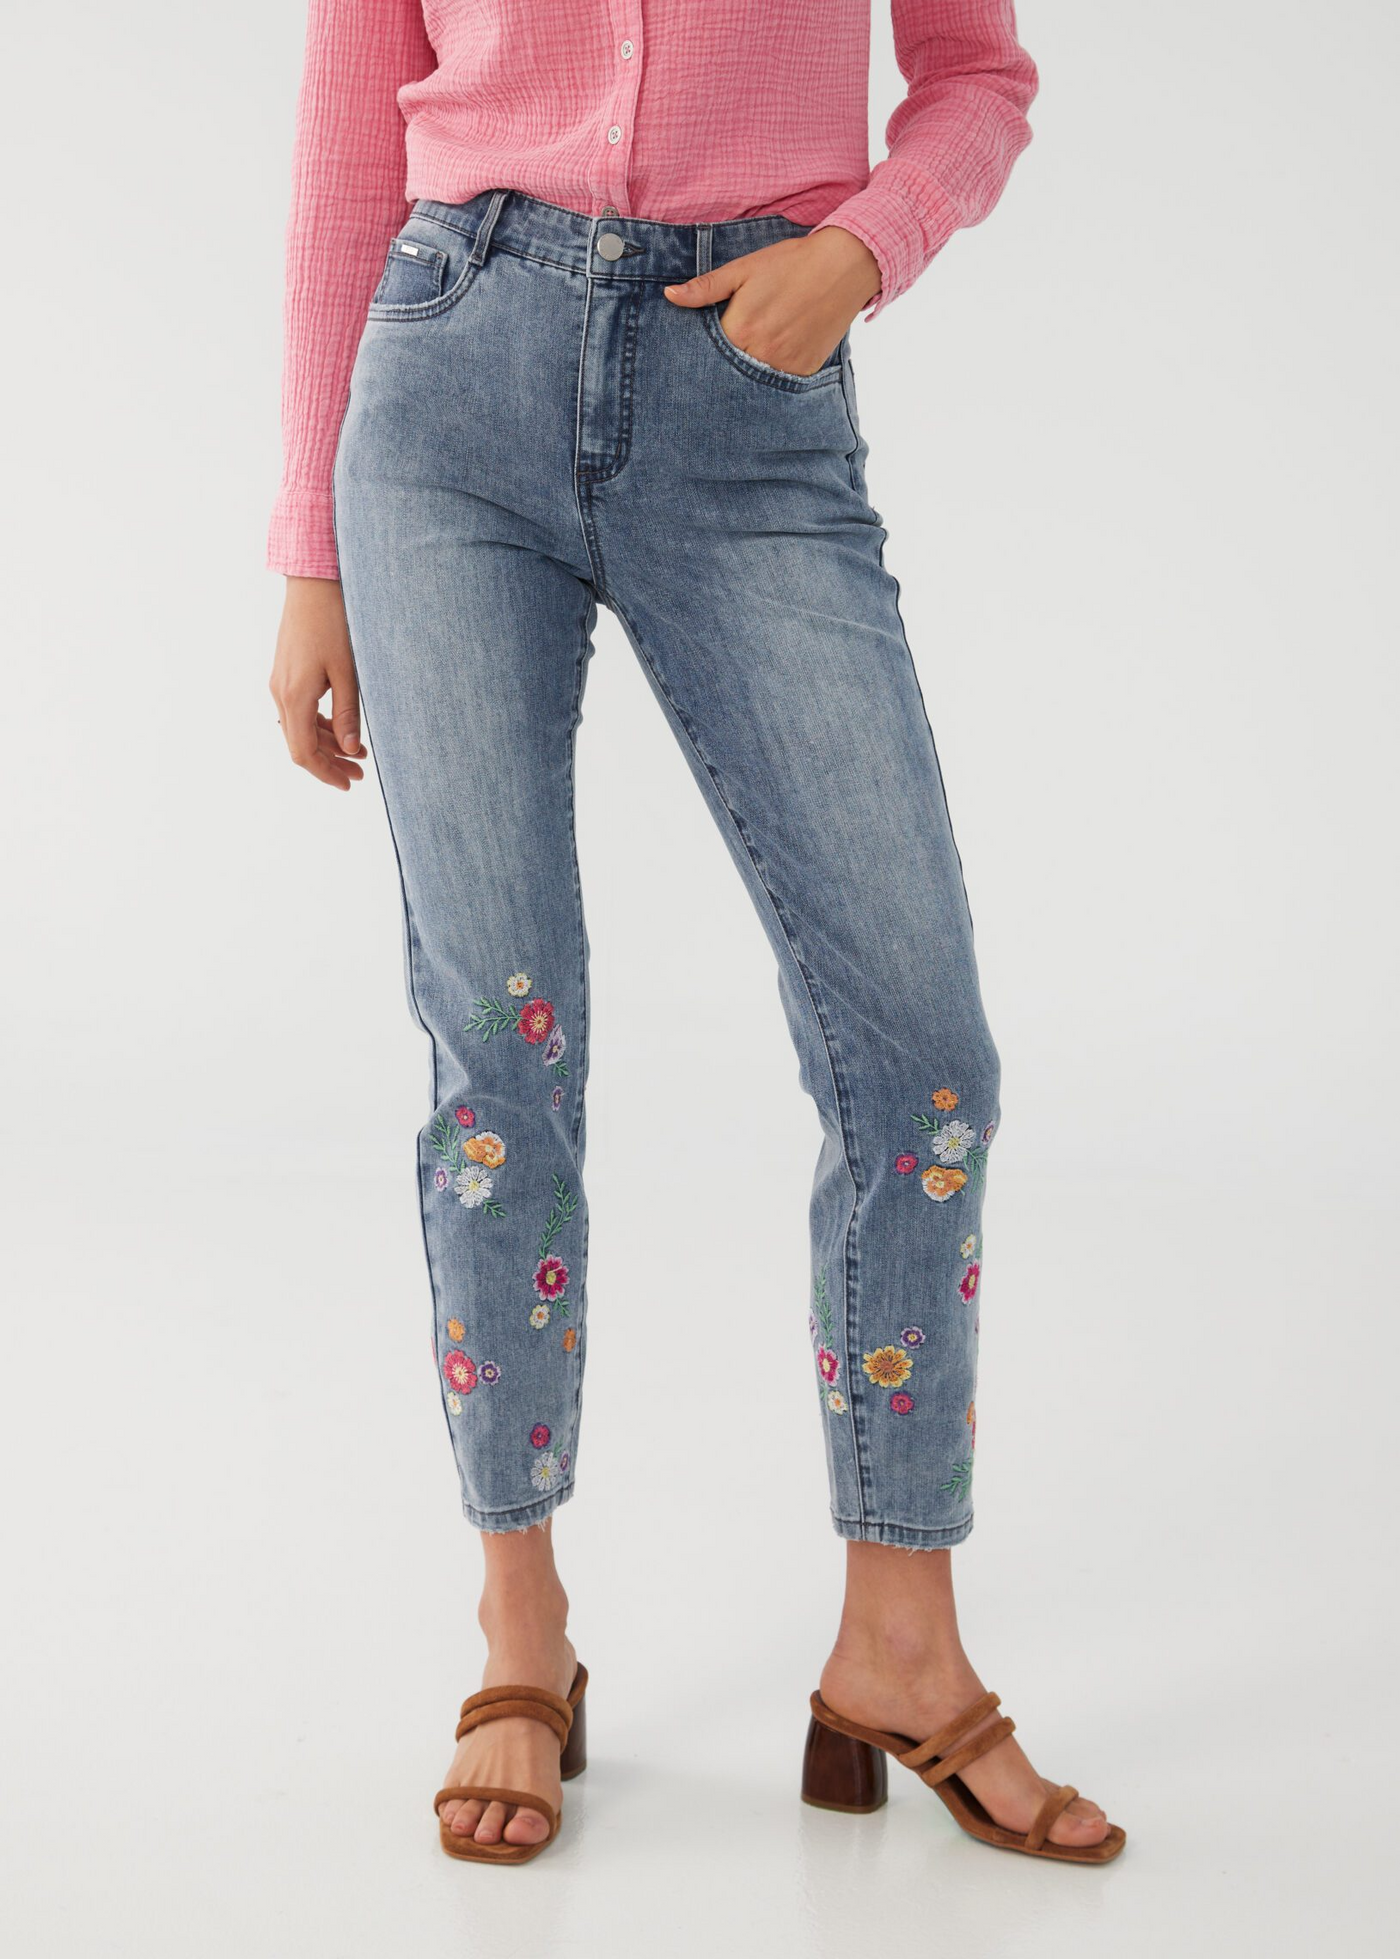 Suzanne Pencil Ankle Jean - Floral Embroider in Light Wash